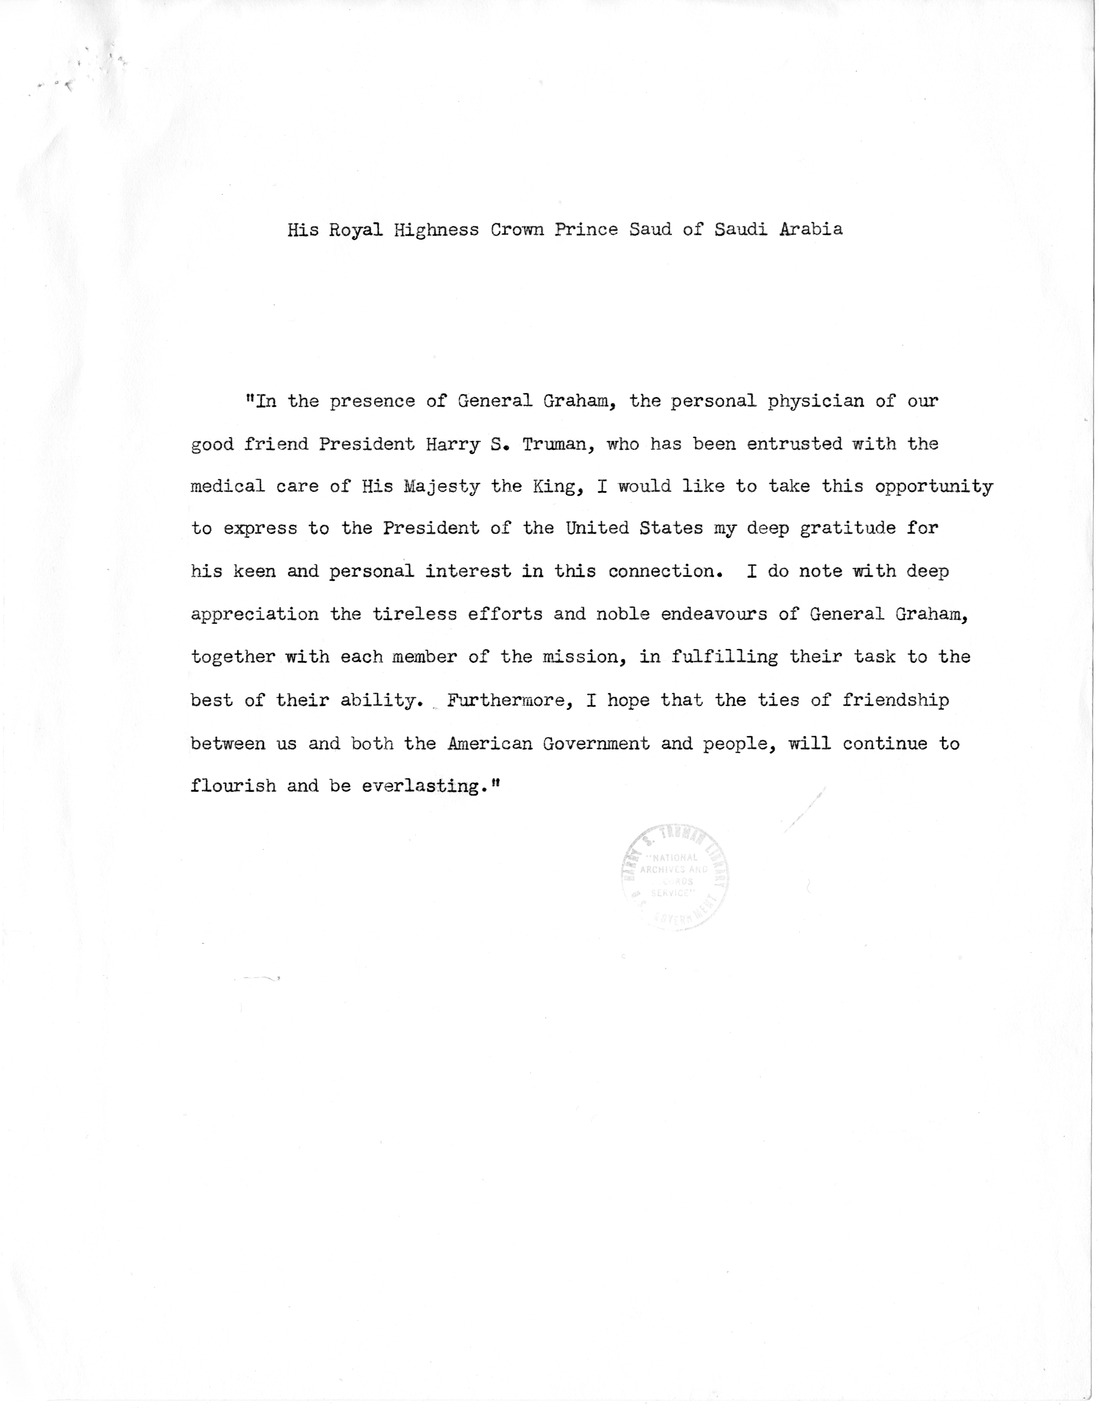 Message from His Royal Highness Crown Prince Saud of Saudi Arabia to President Harry S. Truman with Related Material